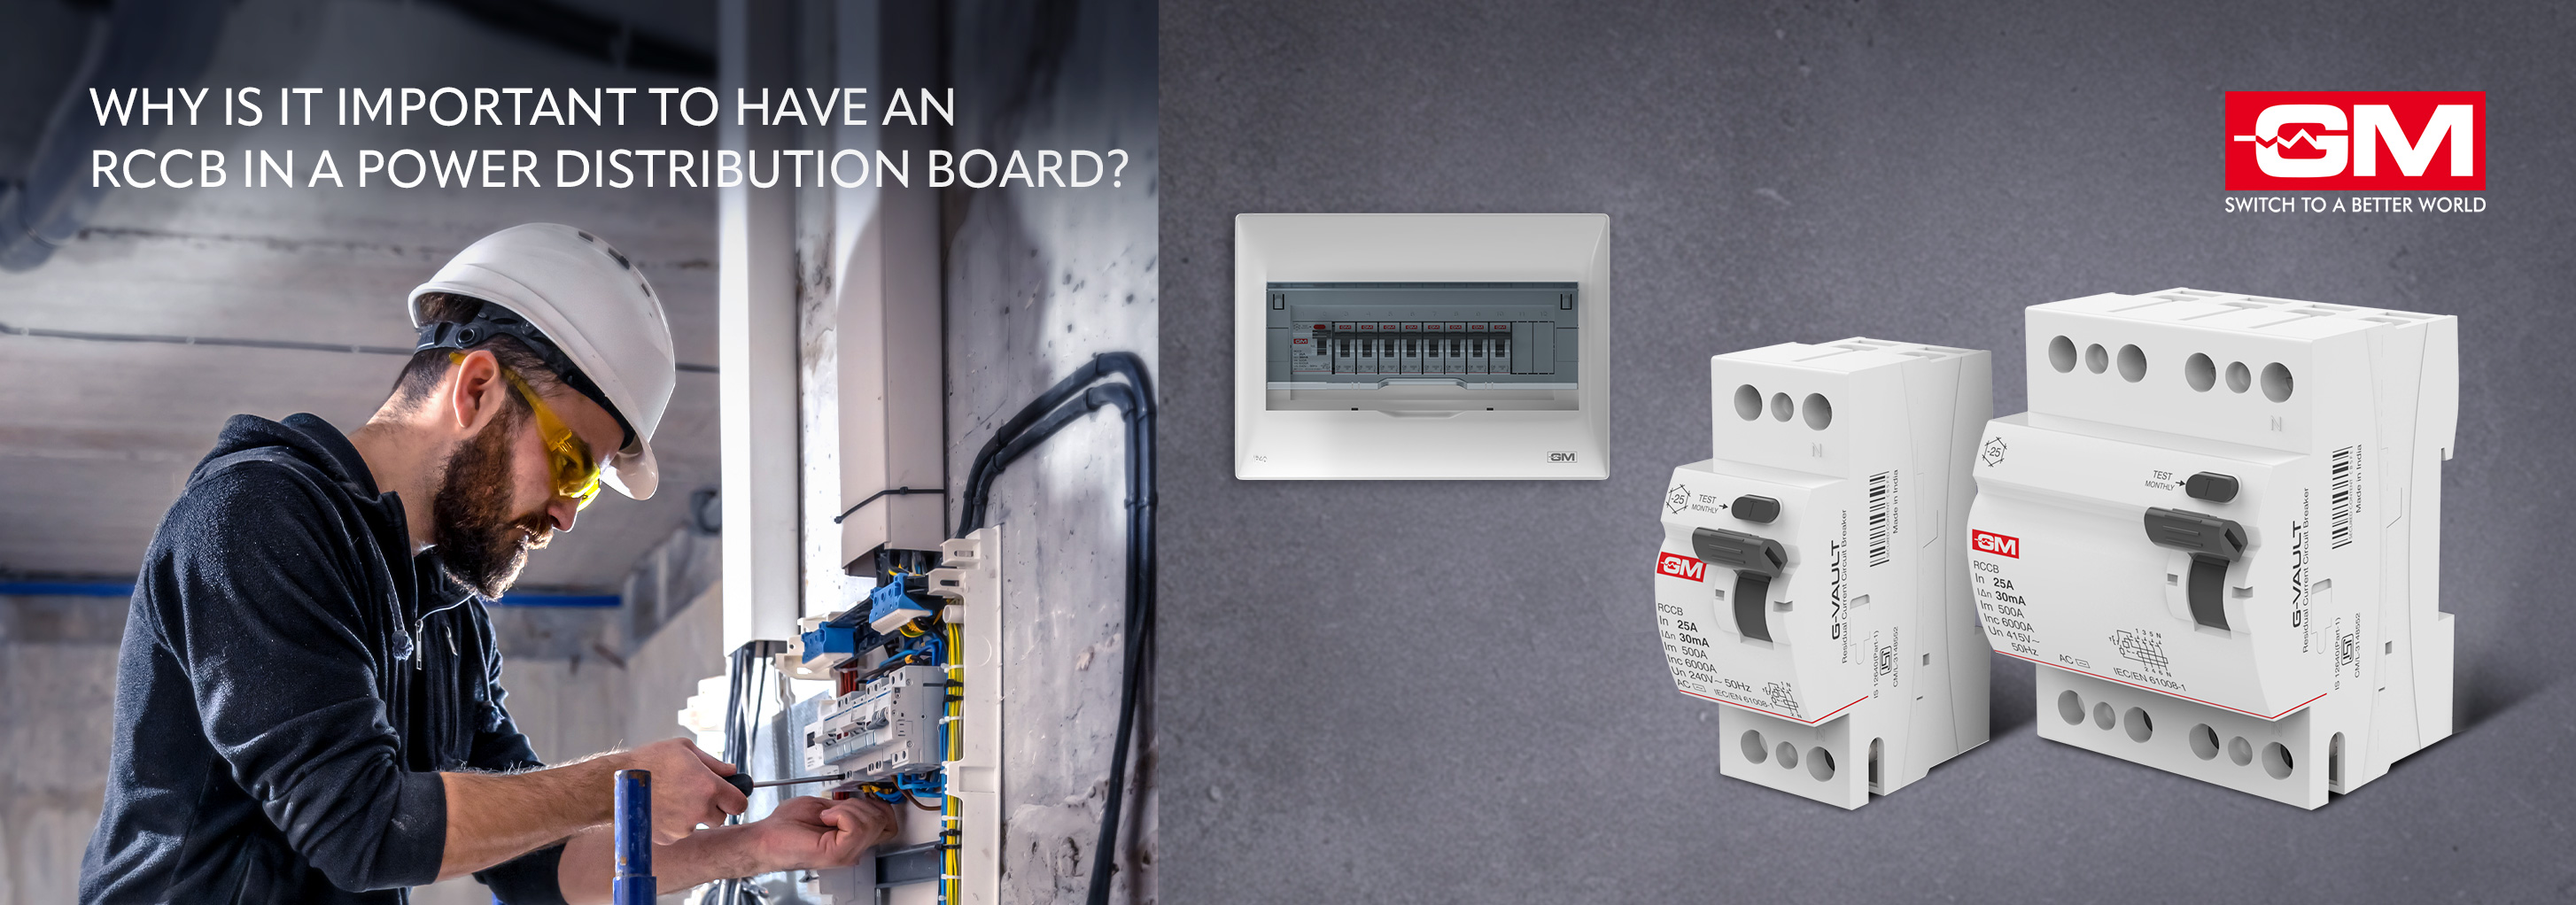 Why is it important to have an RCCB in a Power Distribution Board